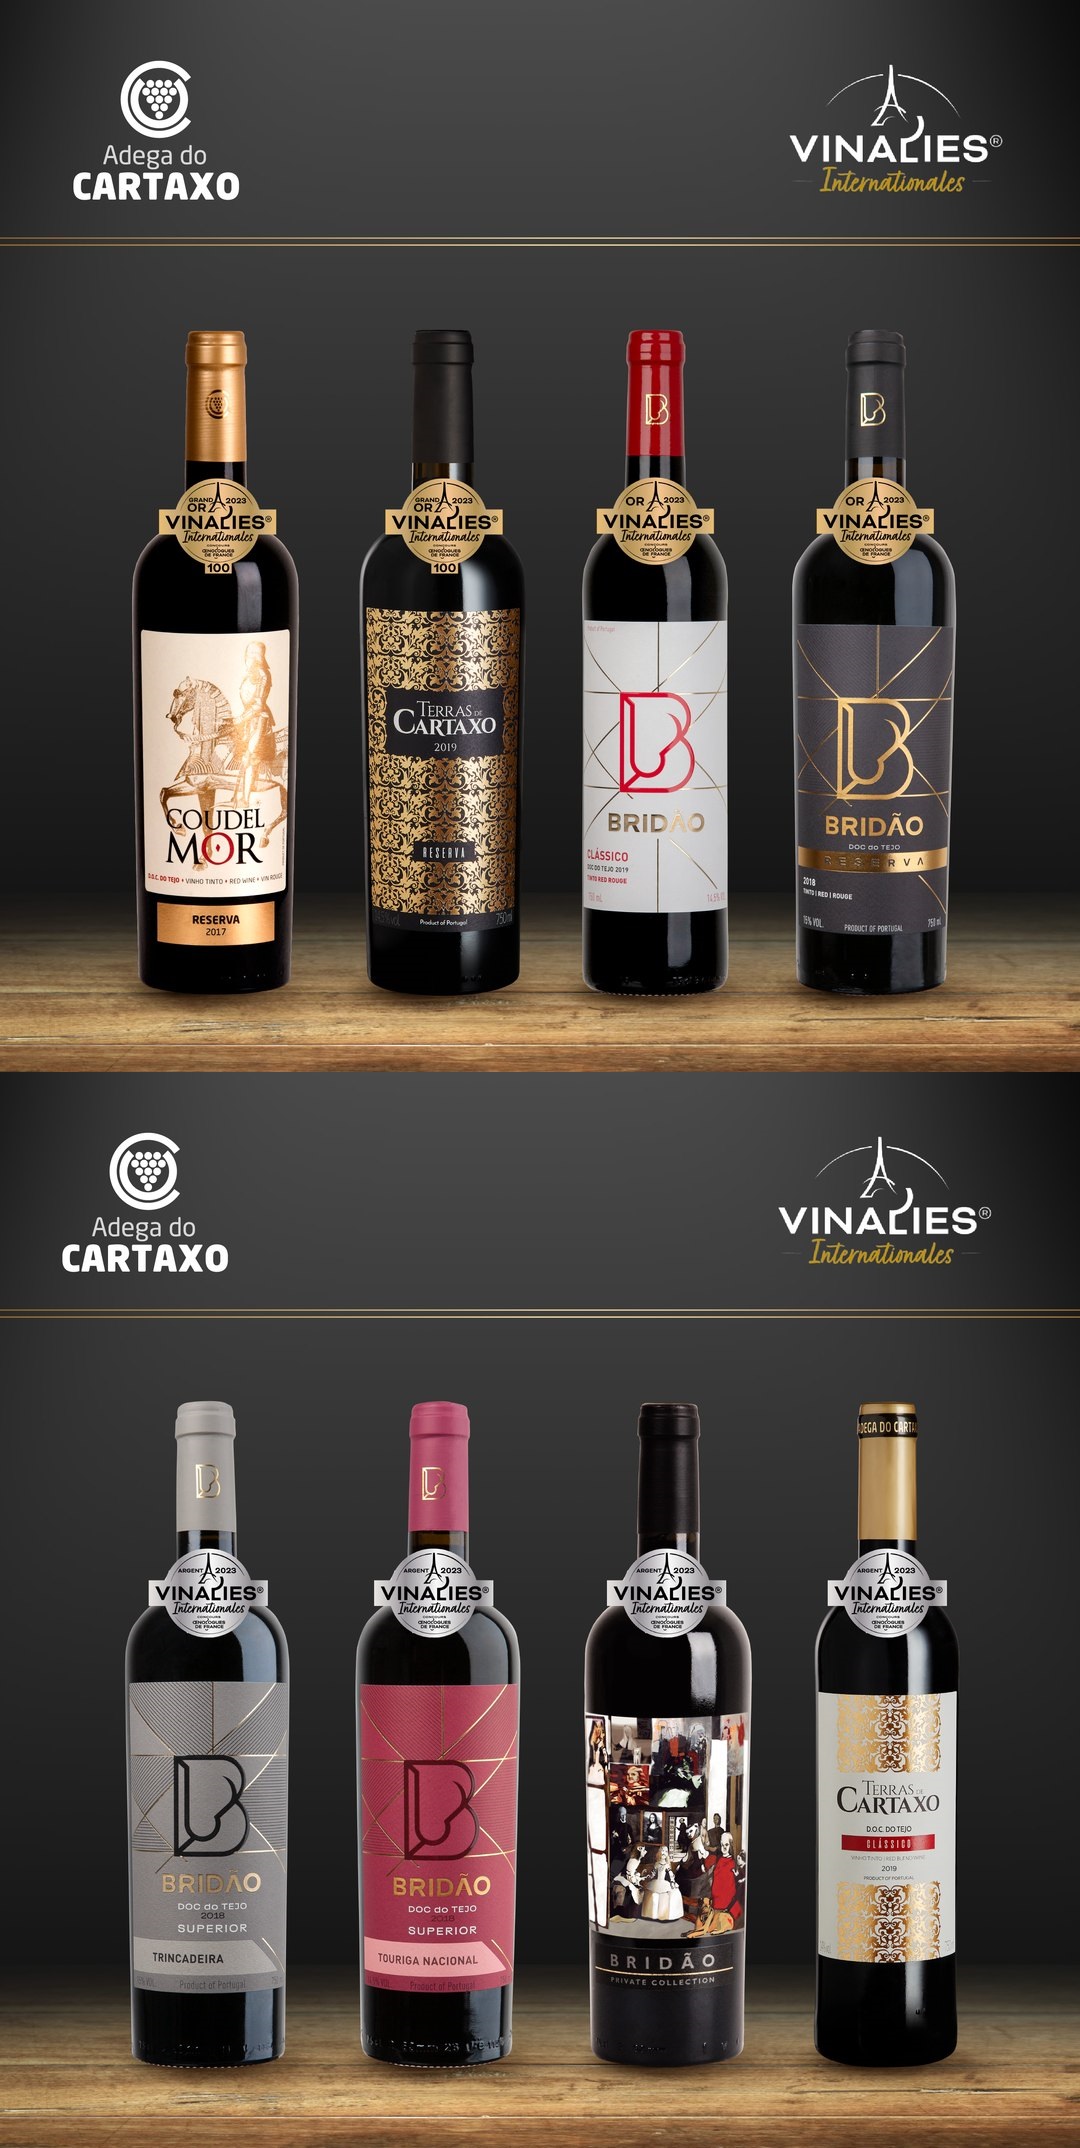 The 2023 Vinalies Internationales Competition awarded 8 wines from our Winery